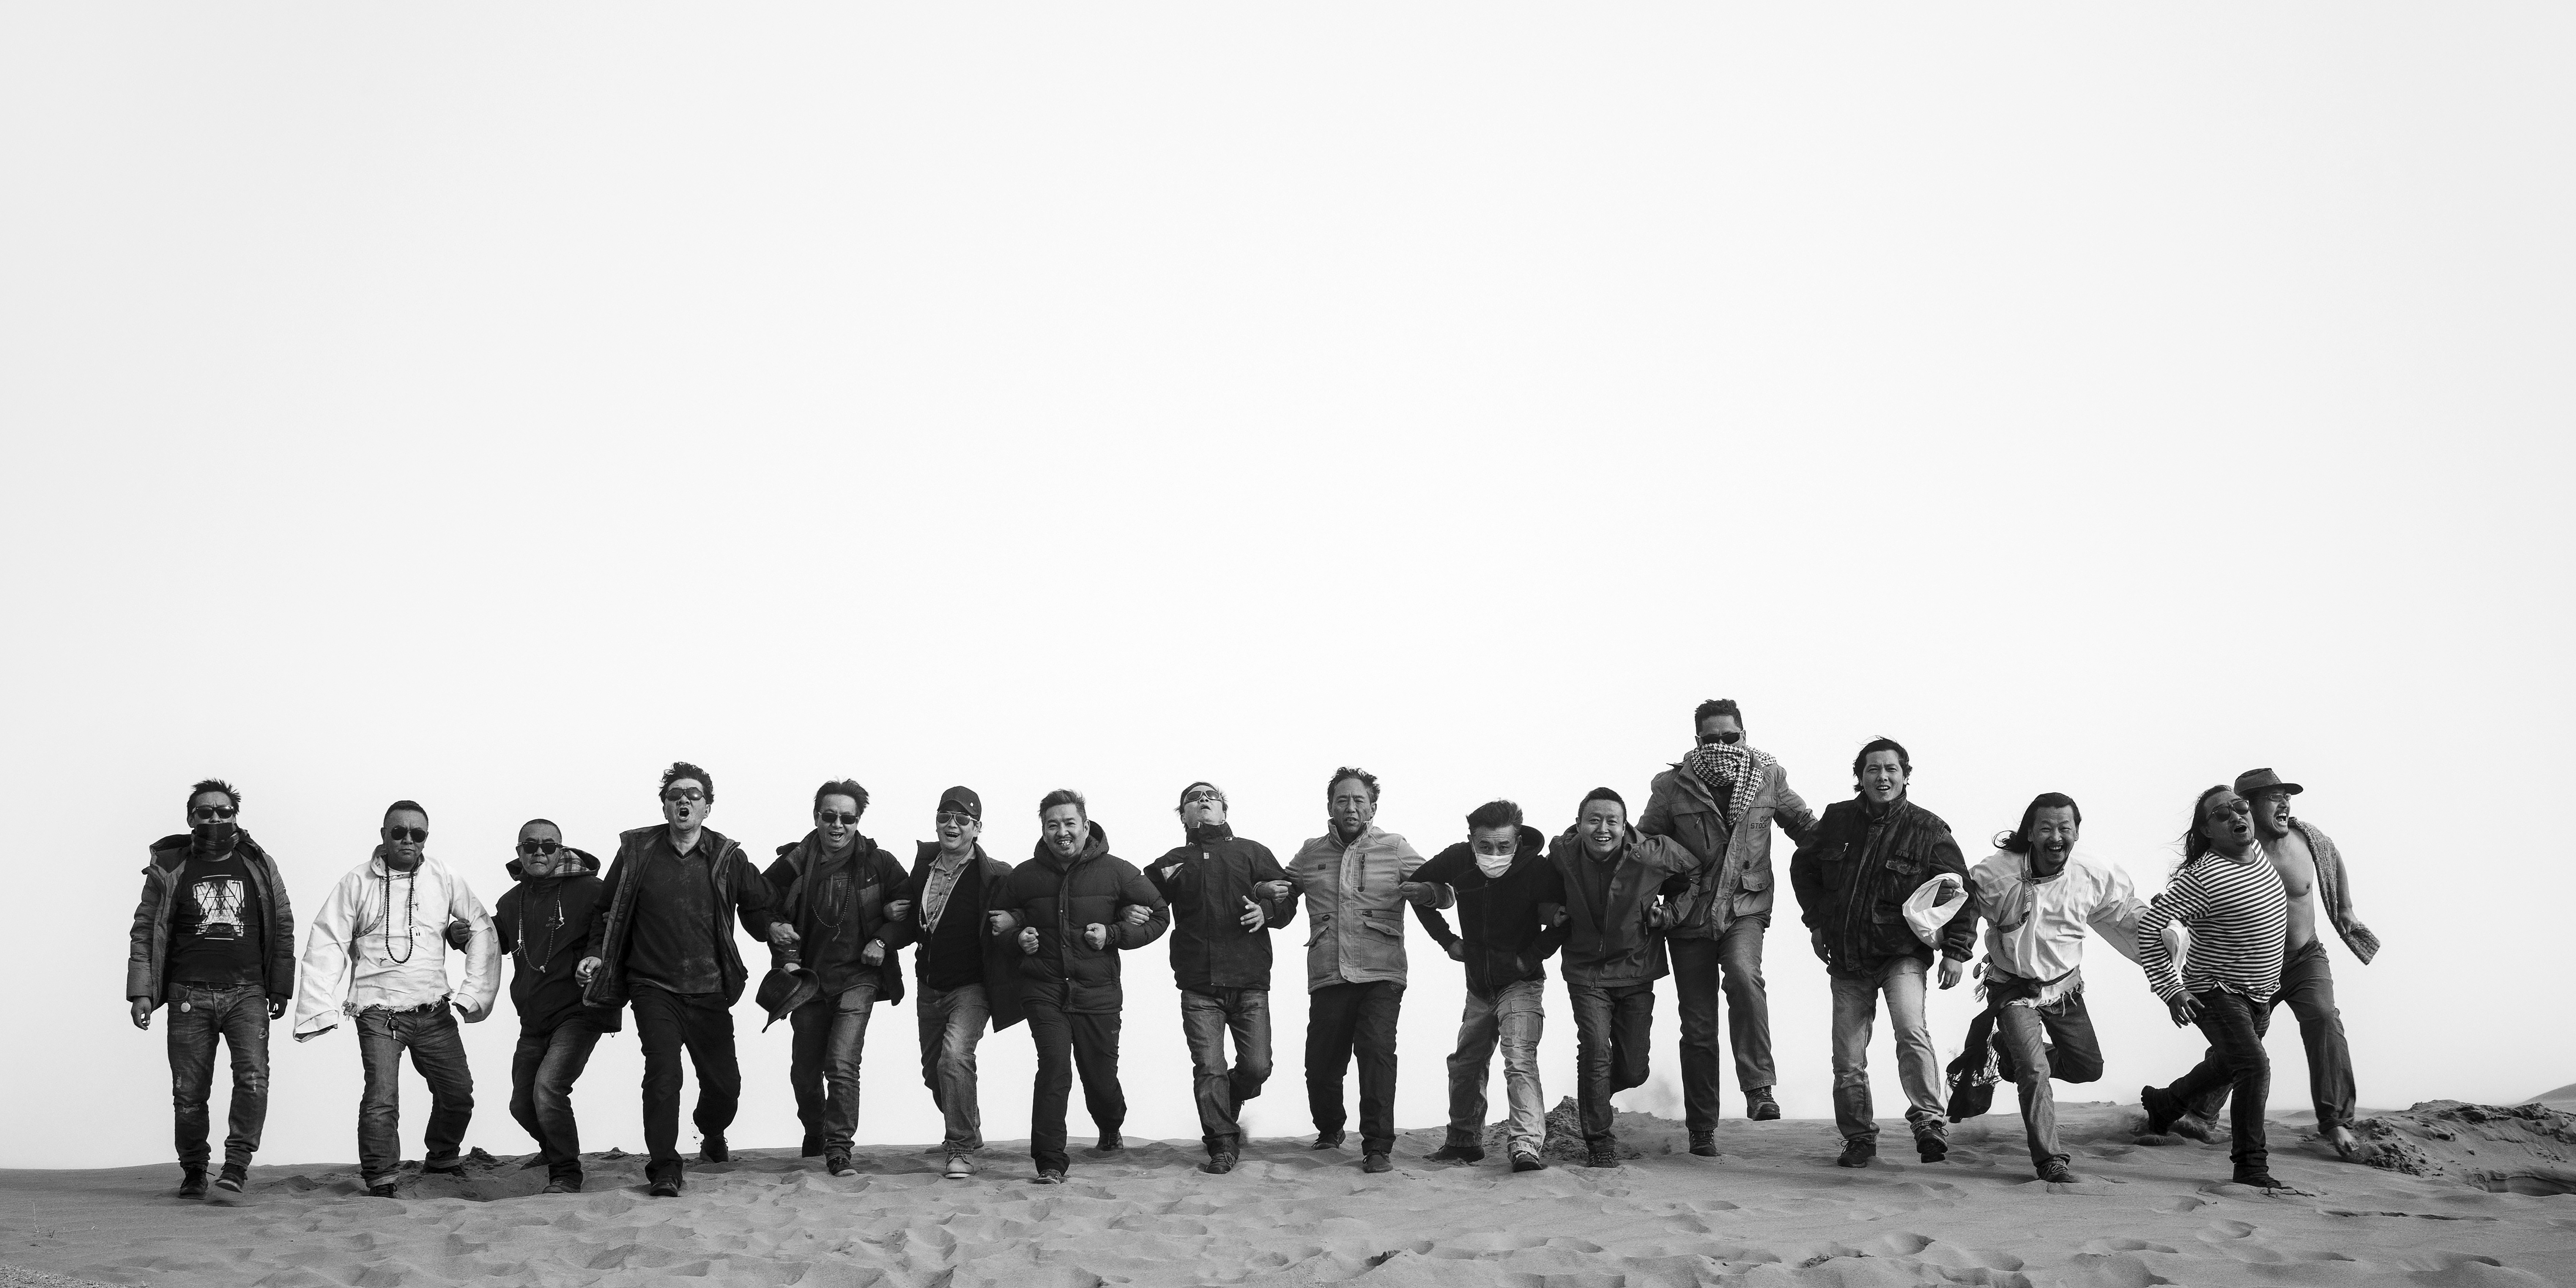 Black and white photograph of 16 people, arms linked, standing in line on sandy surface